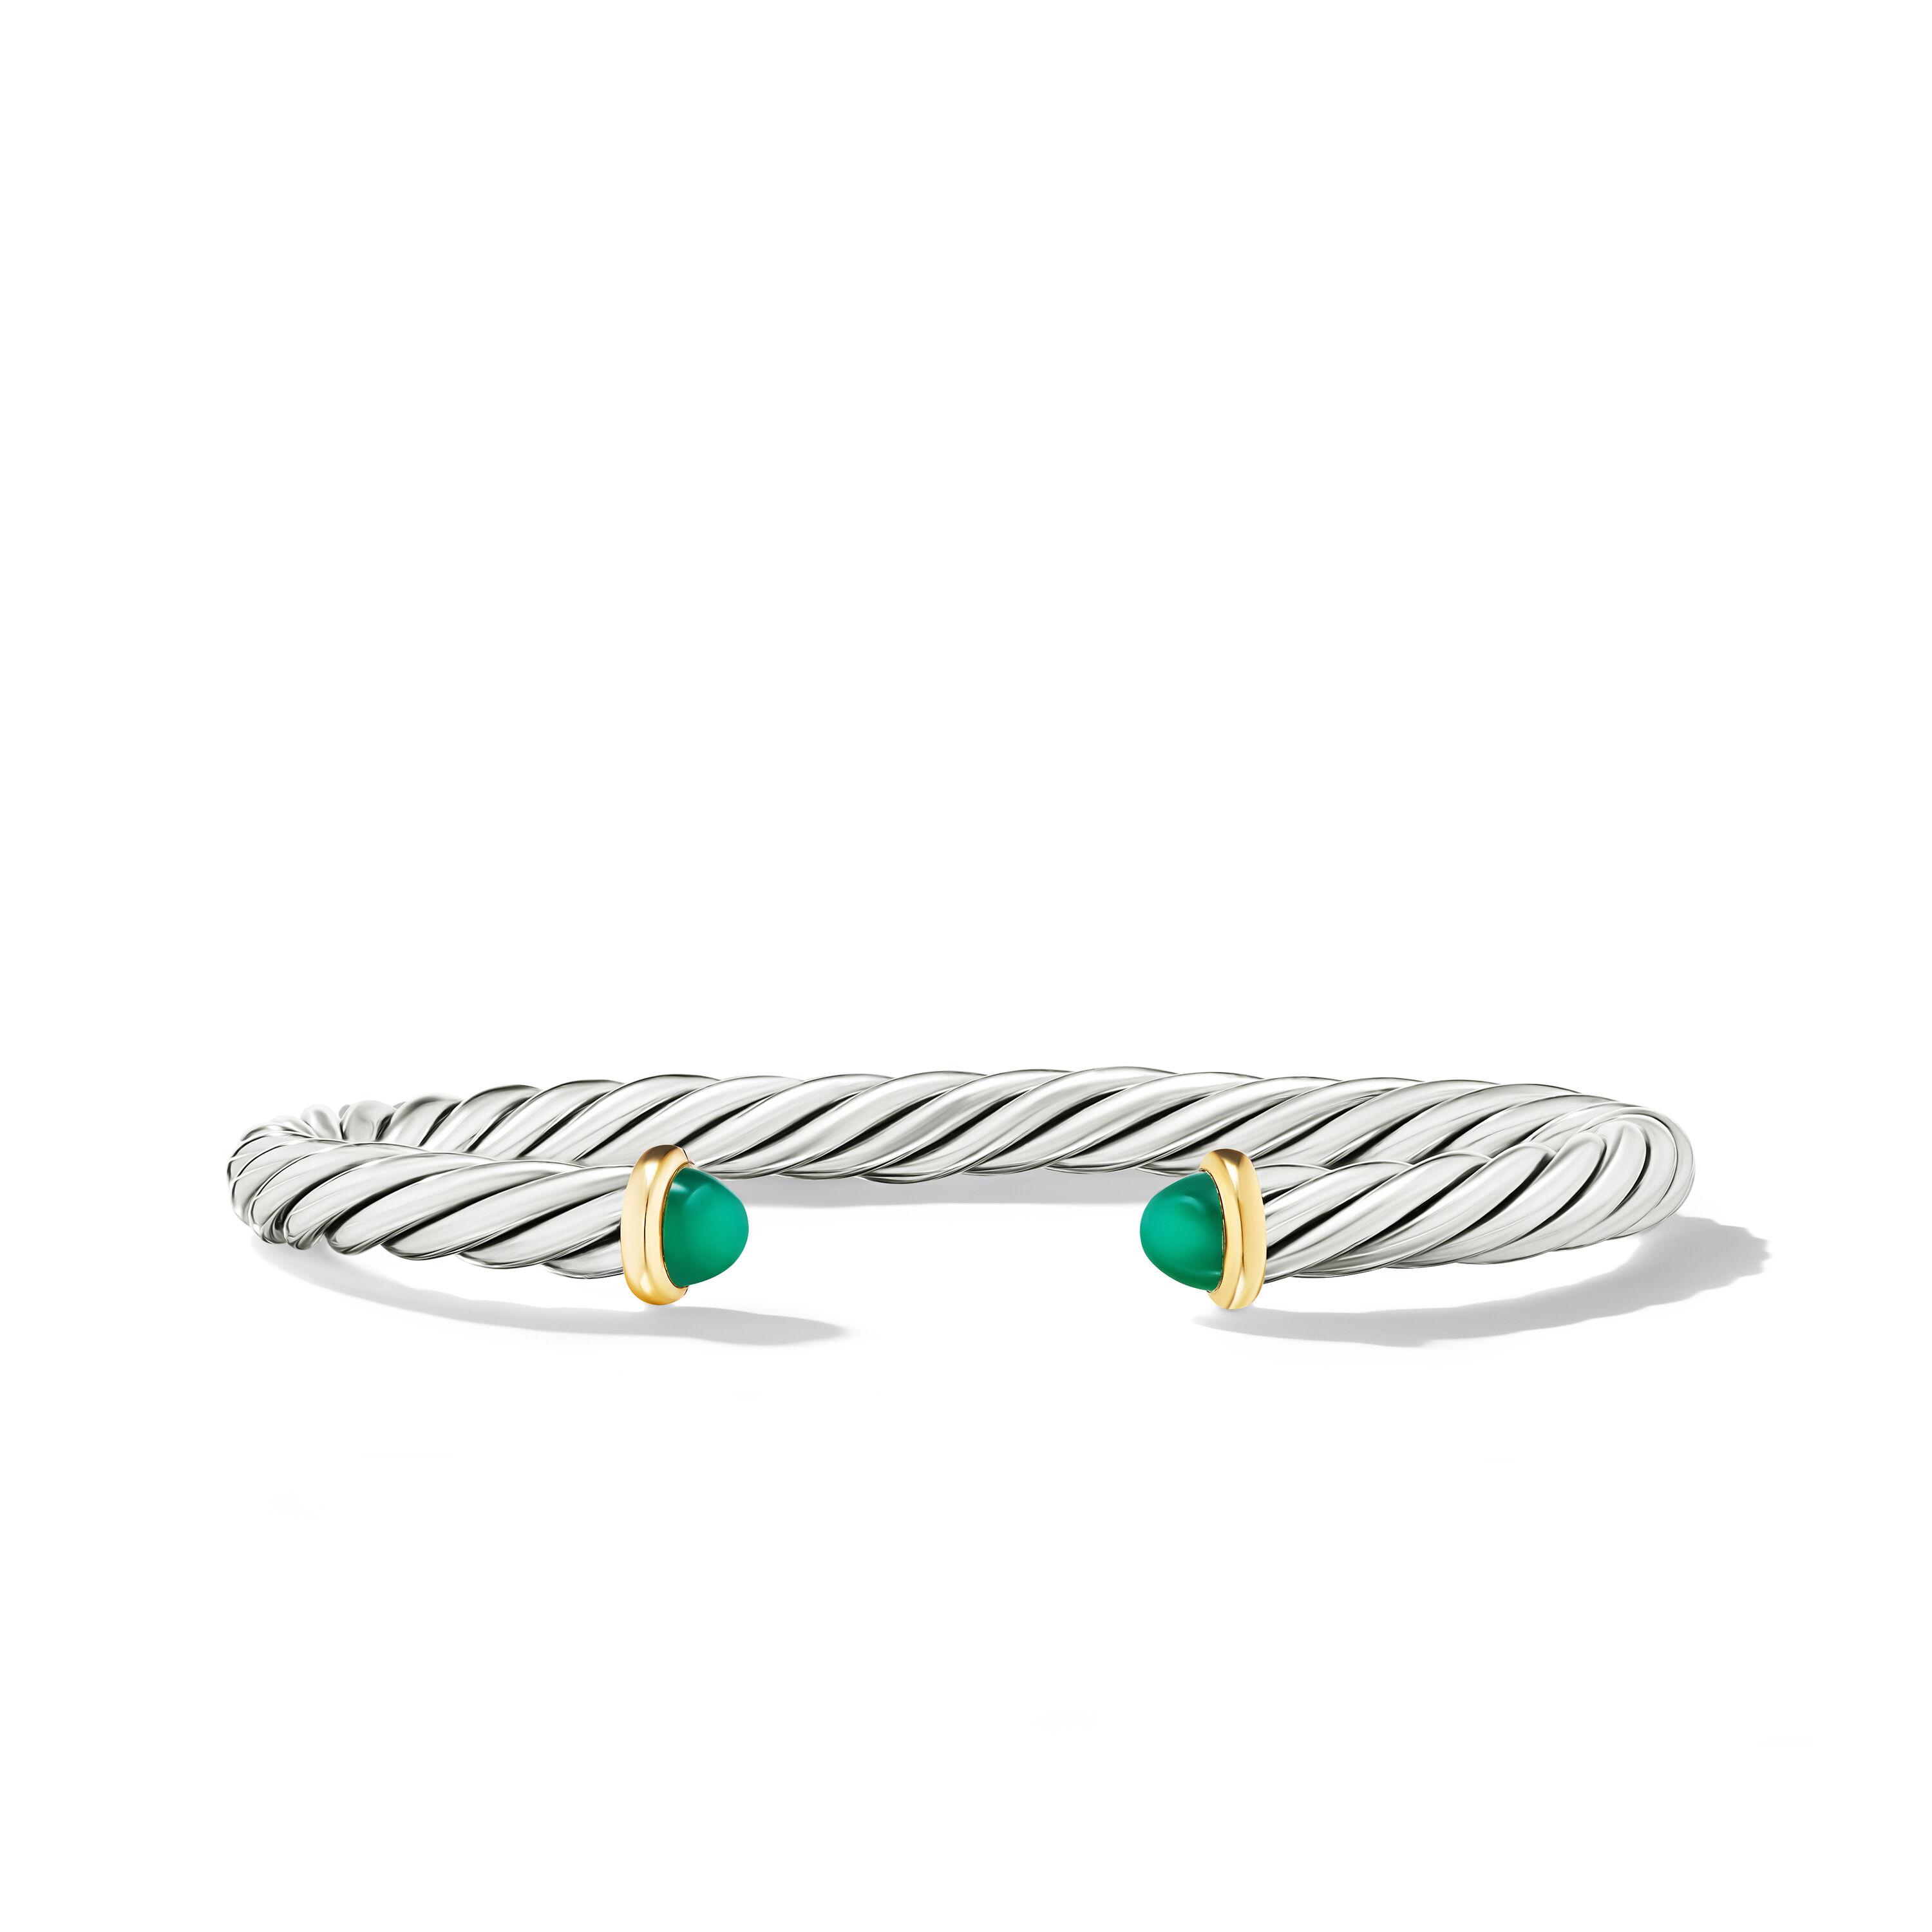 David Yurman 6mm Cable Cuff Bracelet in Sterling Silver with 14K Yellow Gold and Green Onyx, Small